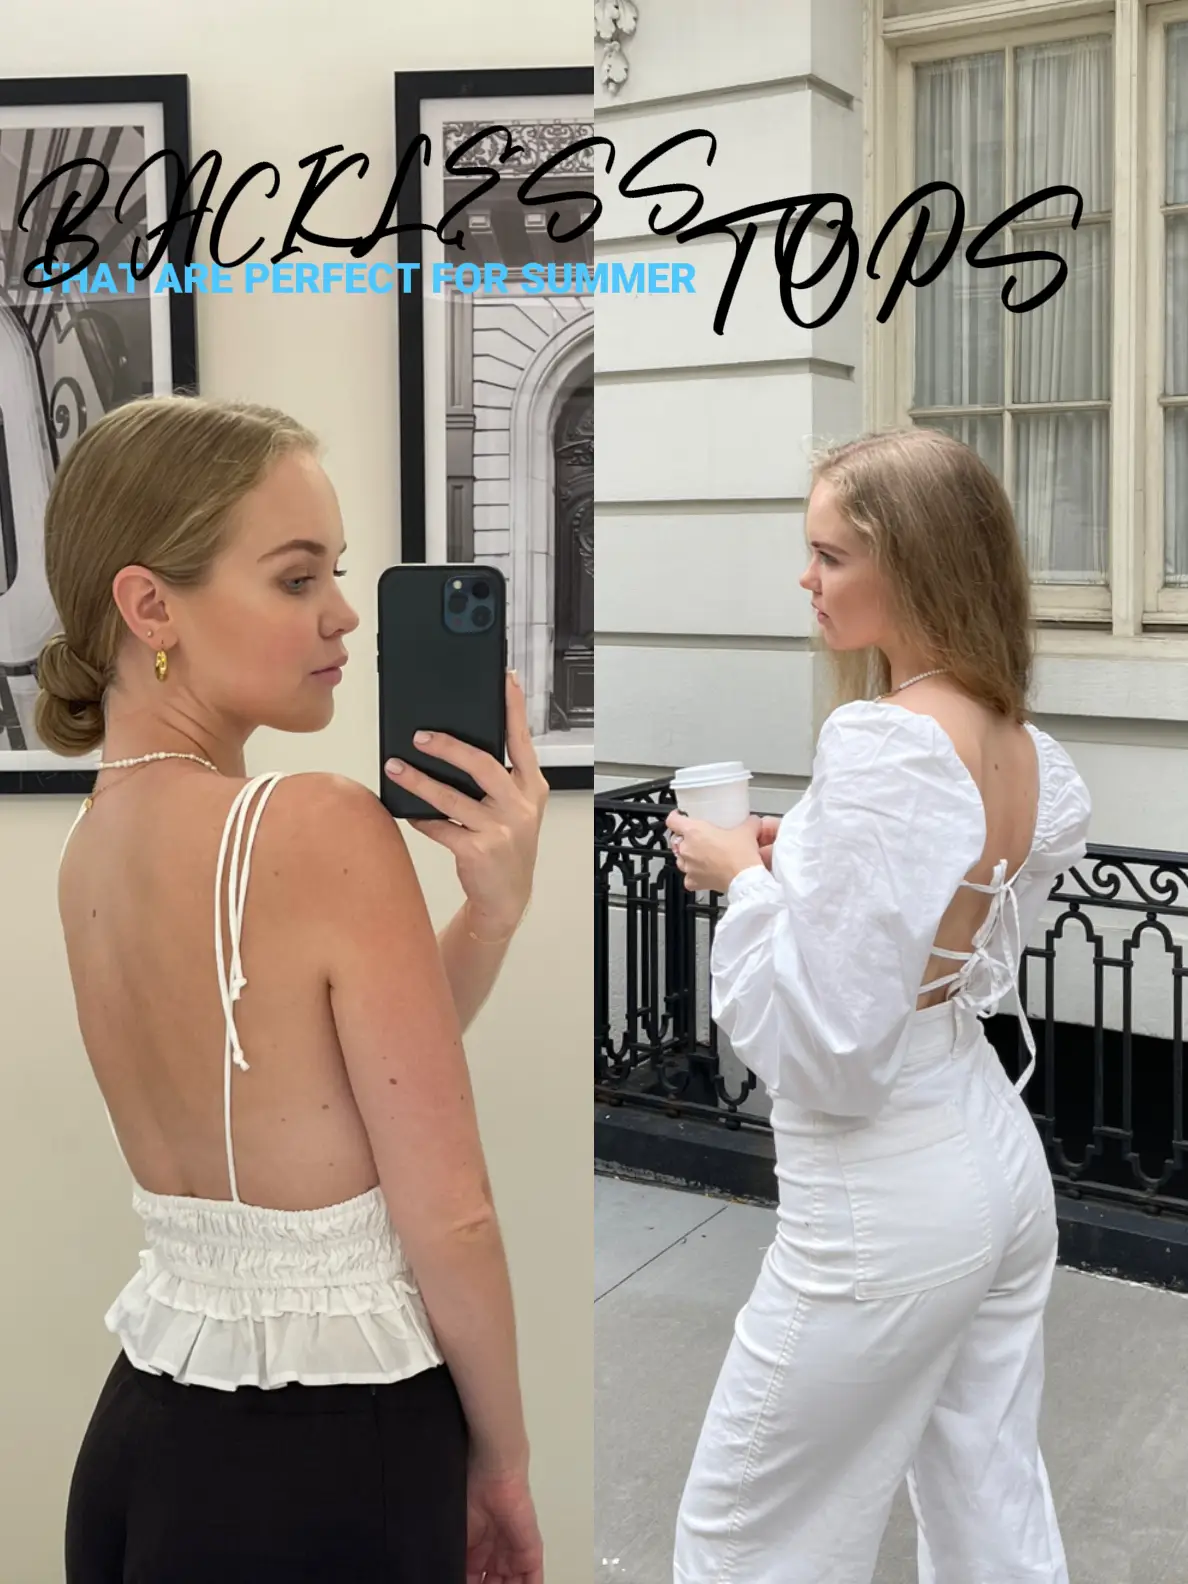 The viral  backless top!! You need it for the summer🌞 have